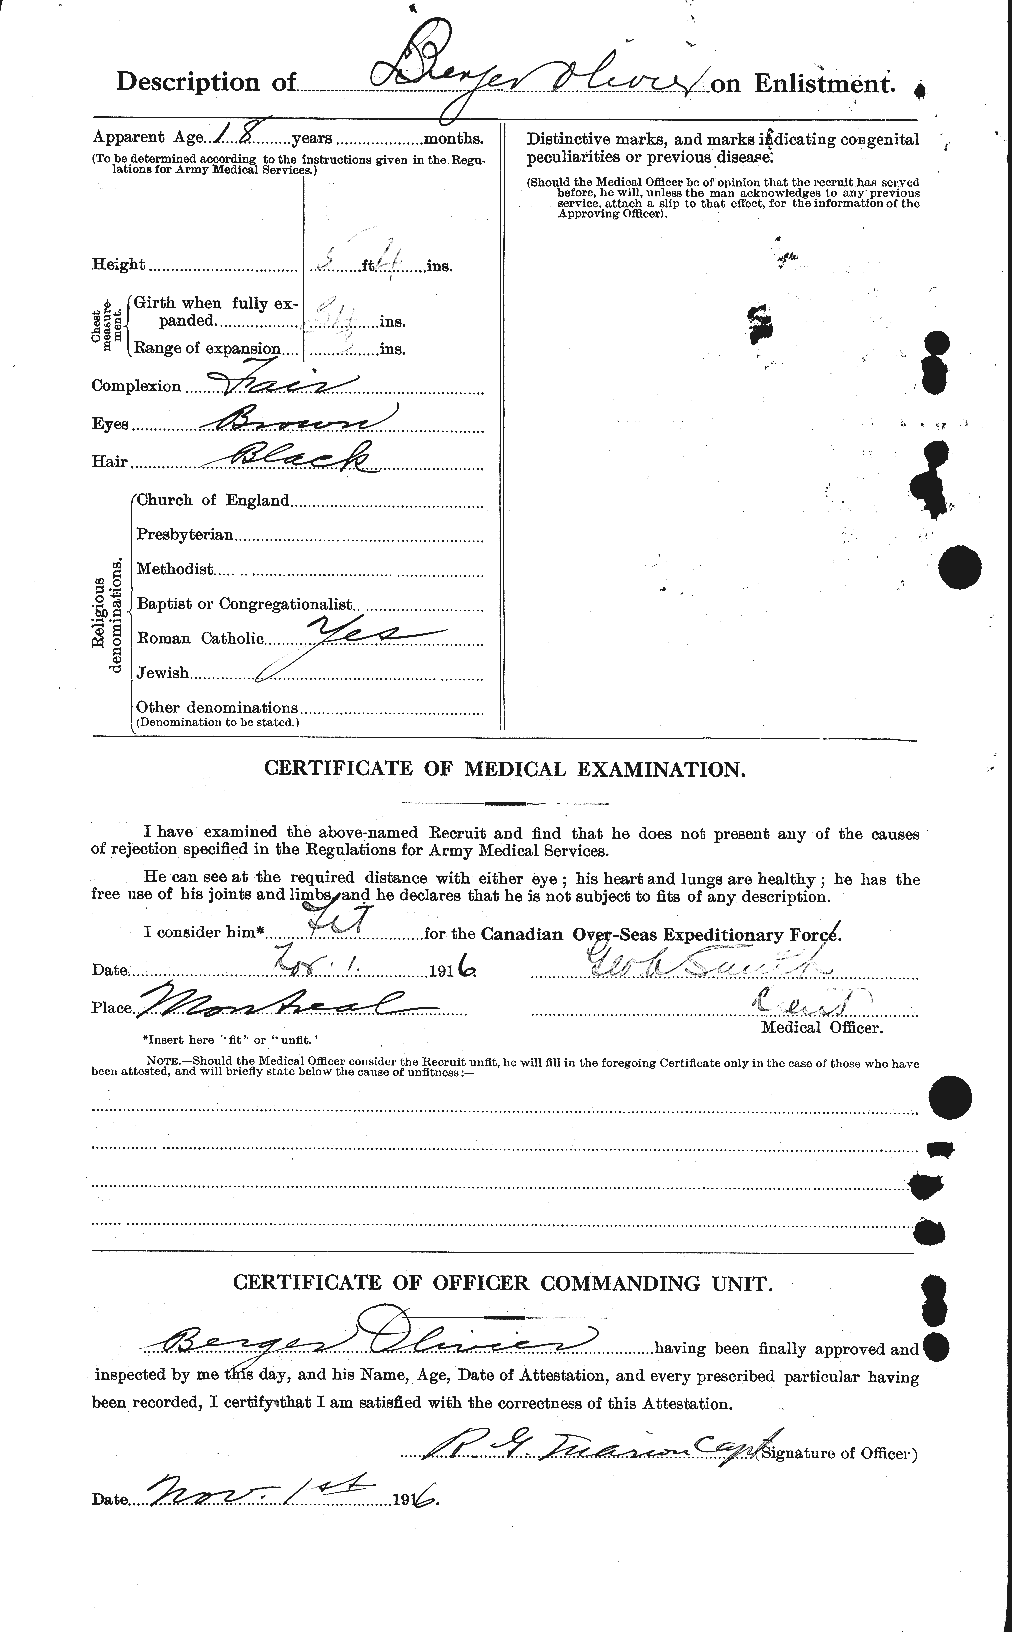 Personnel Records of the First World War - CEF 233091b